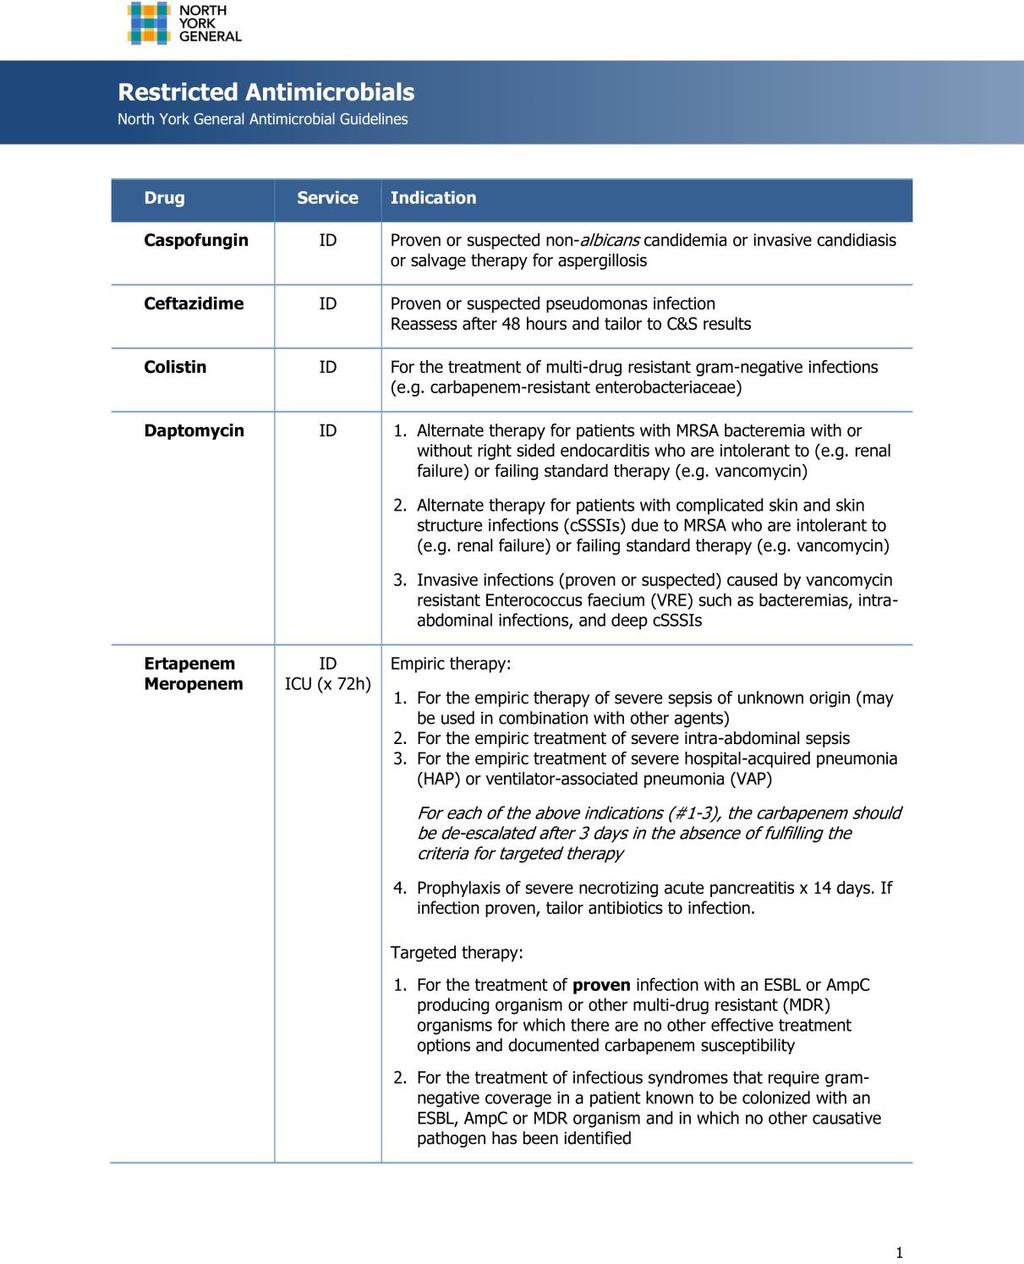 Example 3: North York General Hospital - Restricted Antimicrobial Guidelines This resource was created by North York General Hospital.